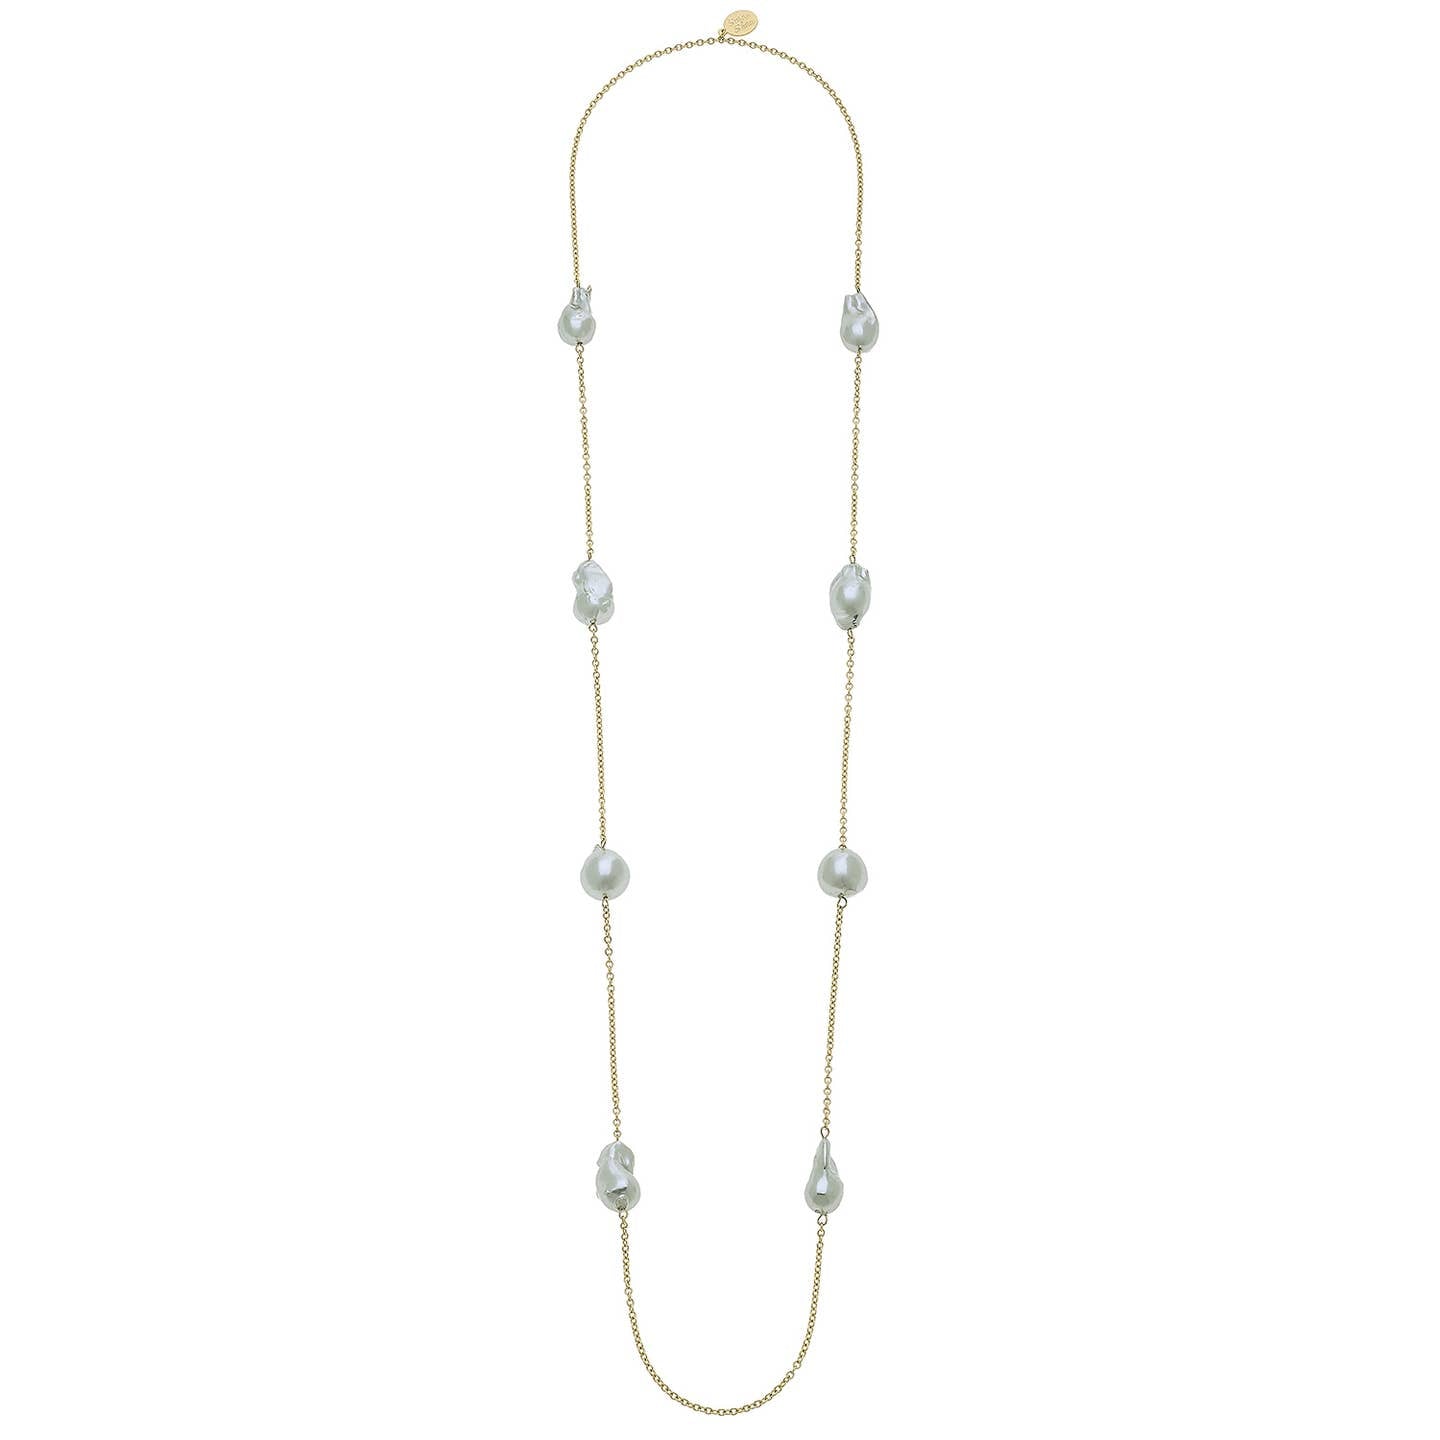 GOLD CHAIN WITH GREY GENUINE FRESHWATER BAROQUE PEARLS